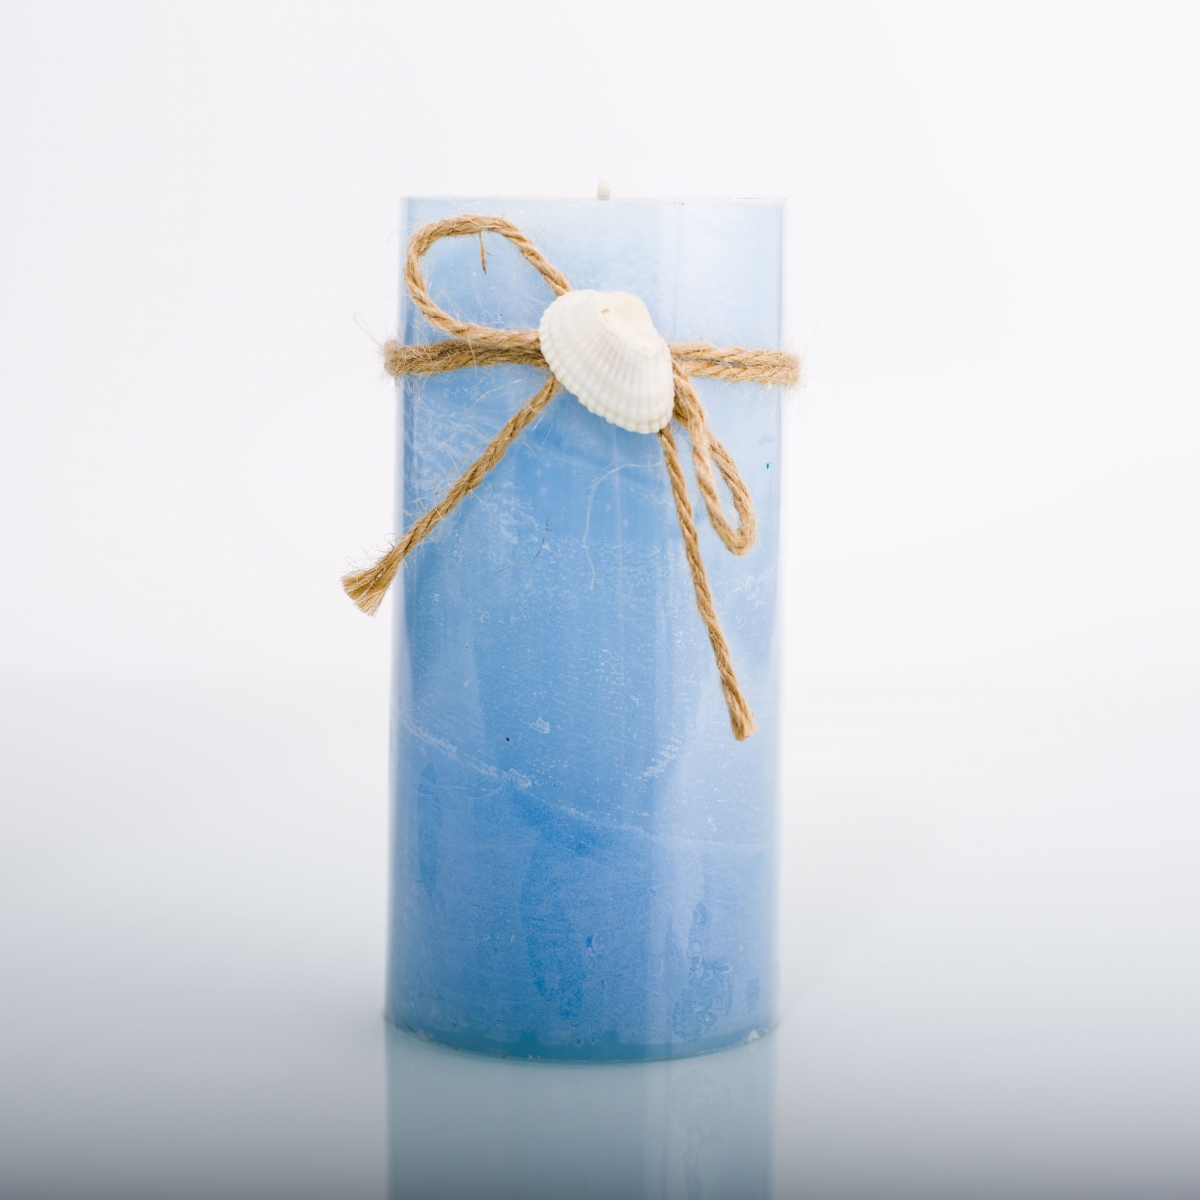 Pillar Candles：Palm Beach ,Blue Color ,Grey Marble ,Hemp Rope ,Shell ,China Factory ,Cheapest Price-HOWCANDLE-Candles,Scented Candles,Aromatherapy Candles,Soy Candles,Vegan Candles,Jar Candles,Pillar Candles,Candle Gift Sets,Essential Oils,Reed Diffuser,Candle Holder,